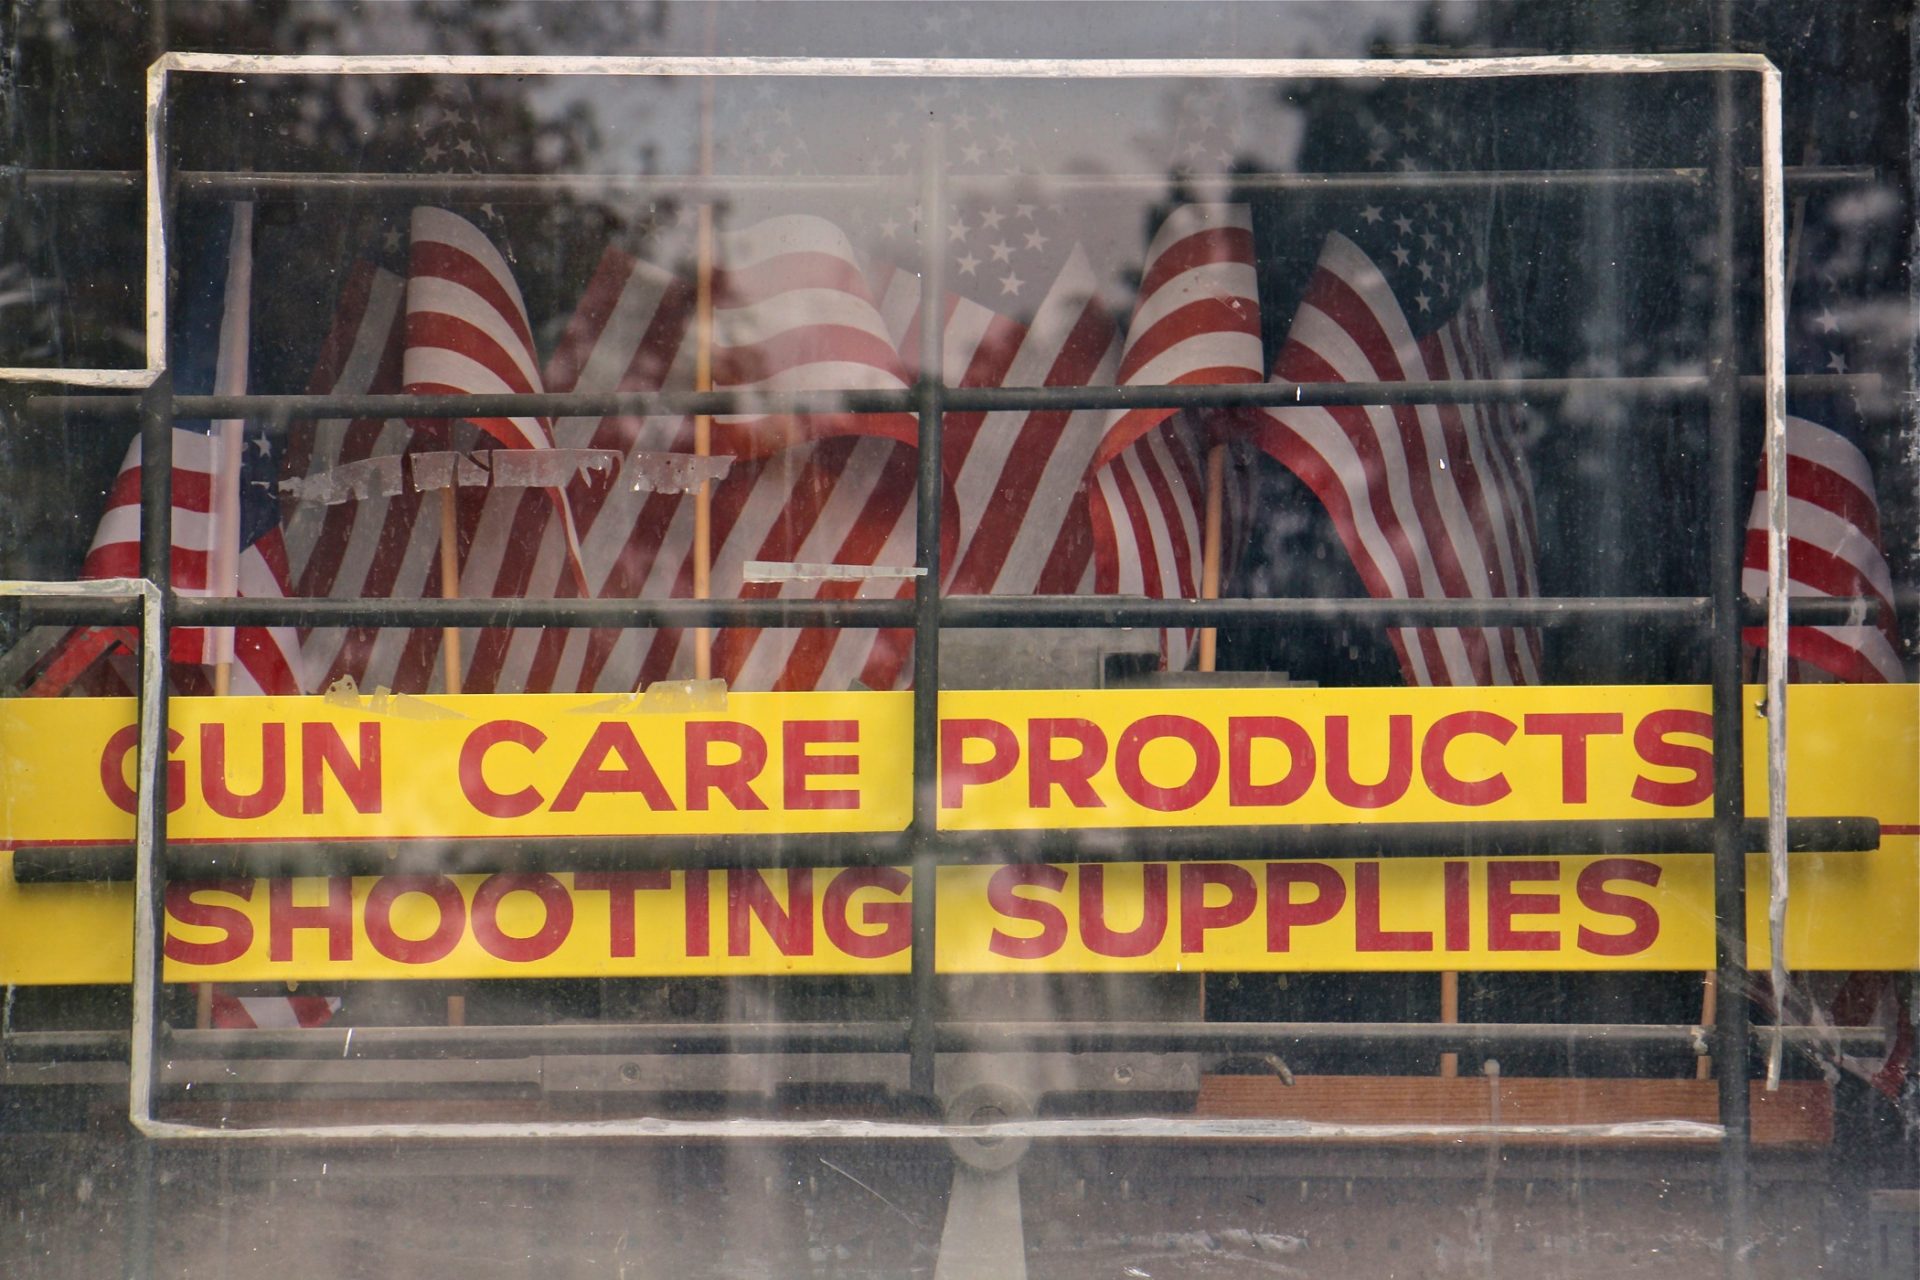 Bob's Little Sport Shop in Glassboro, N.J., has been selling guns, ammunition and hunting equipment in South Jersey since 1975.